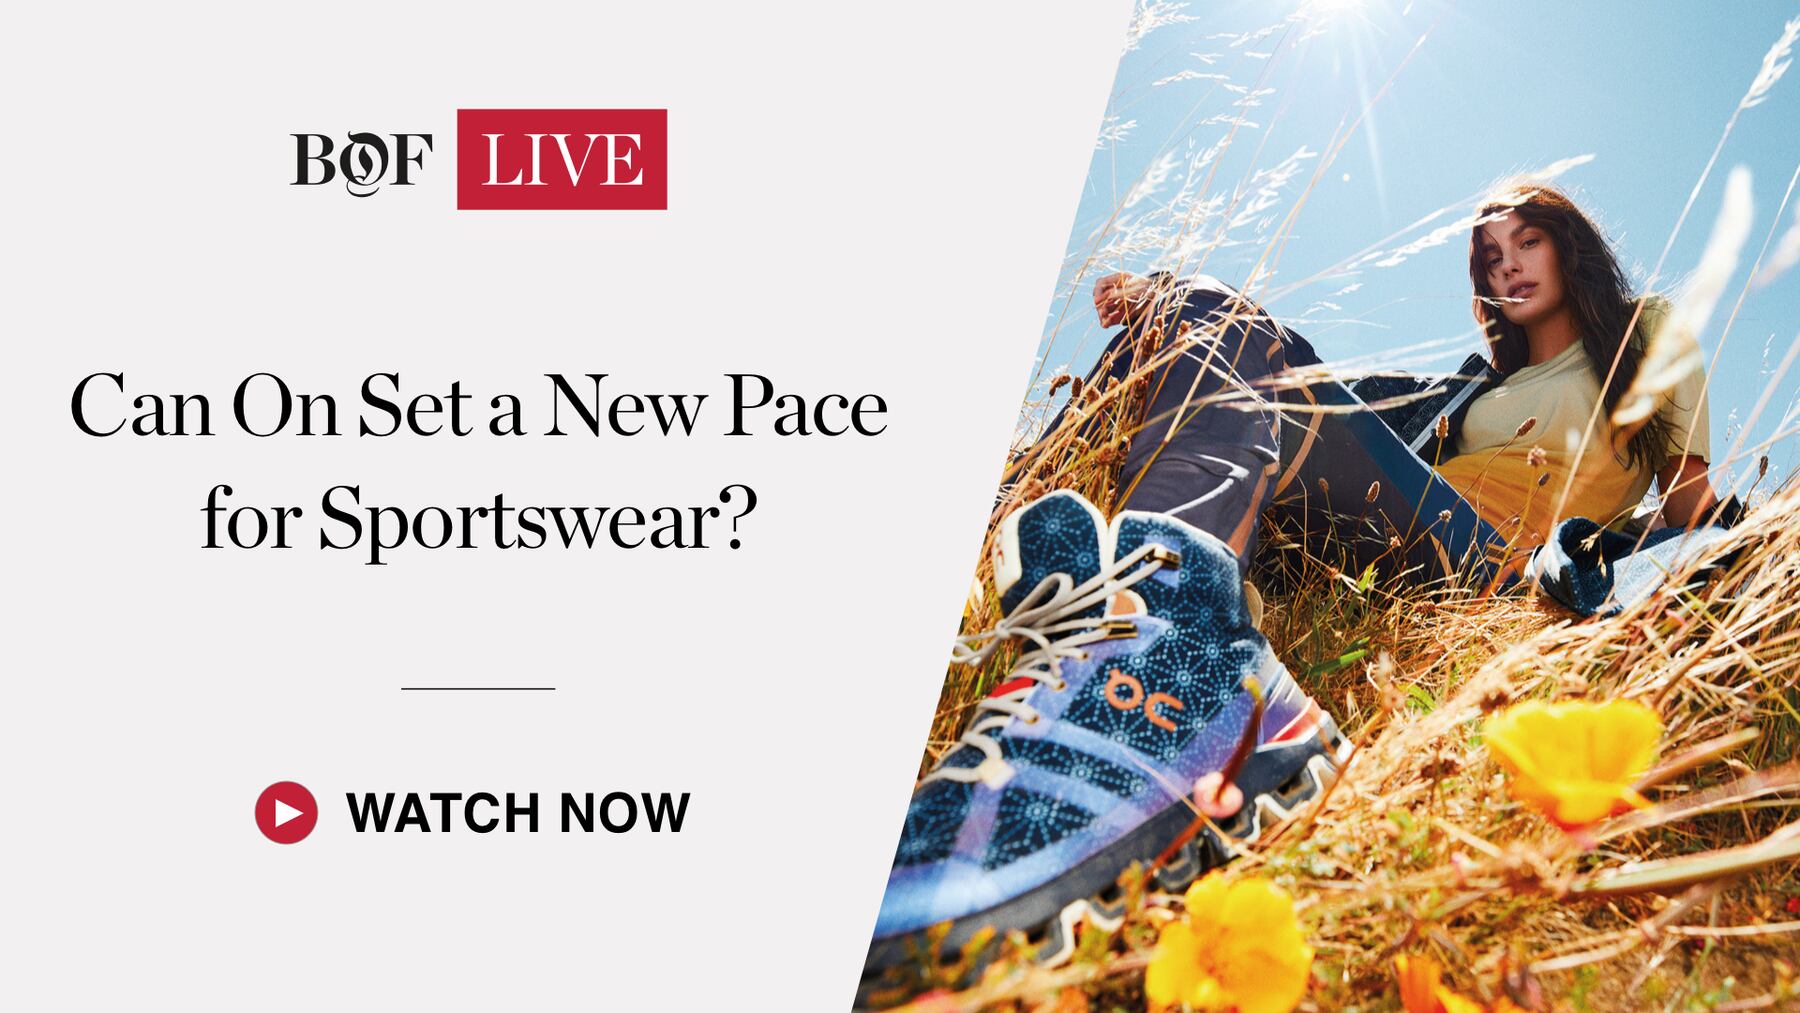 Can On Set a New Pace for Sportswear?